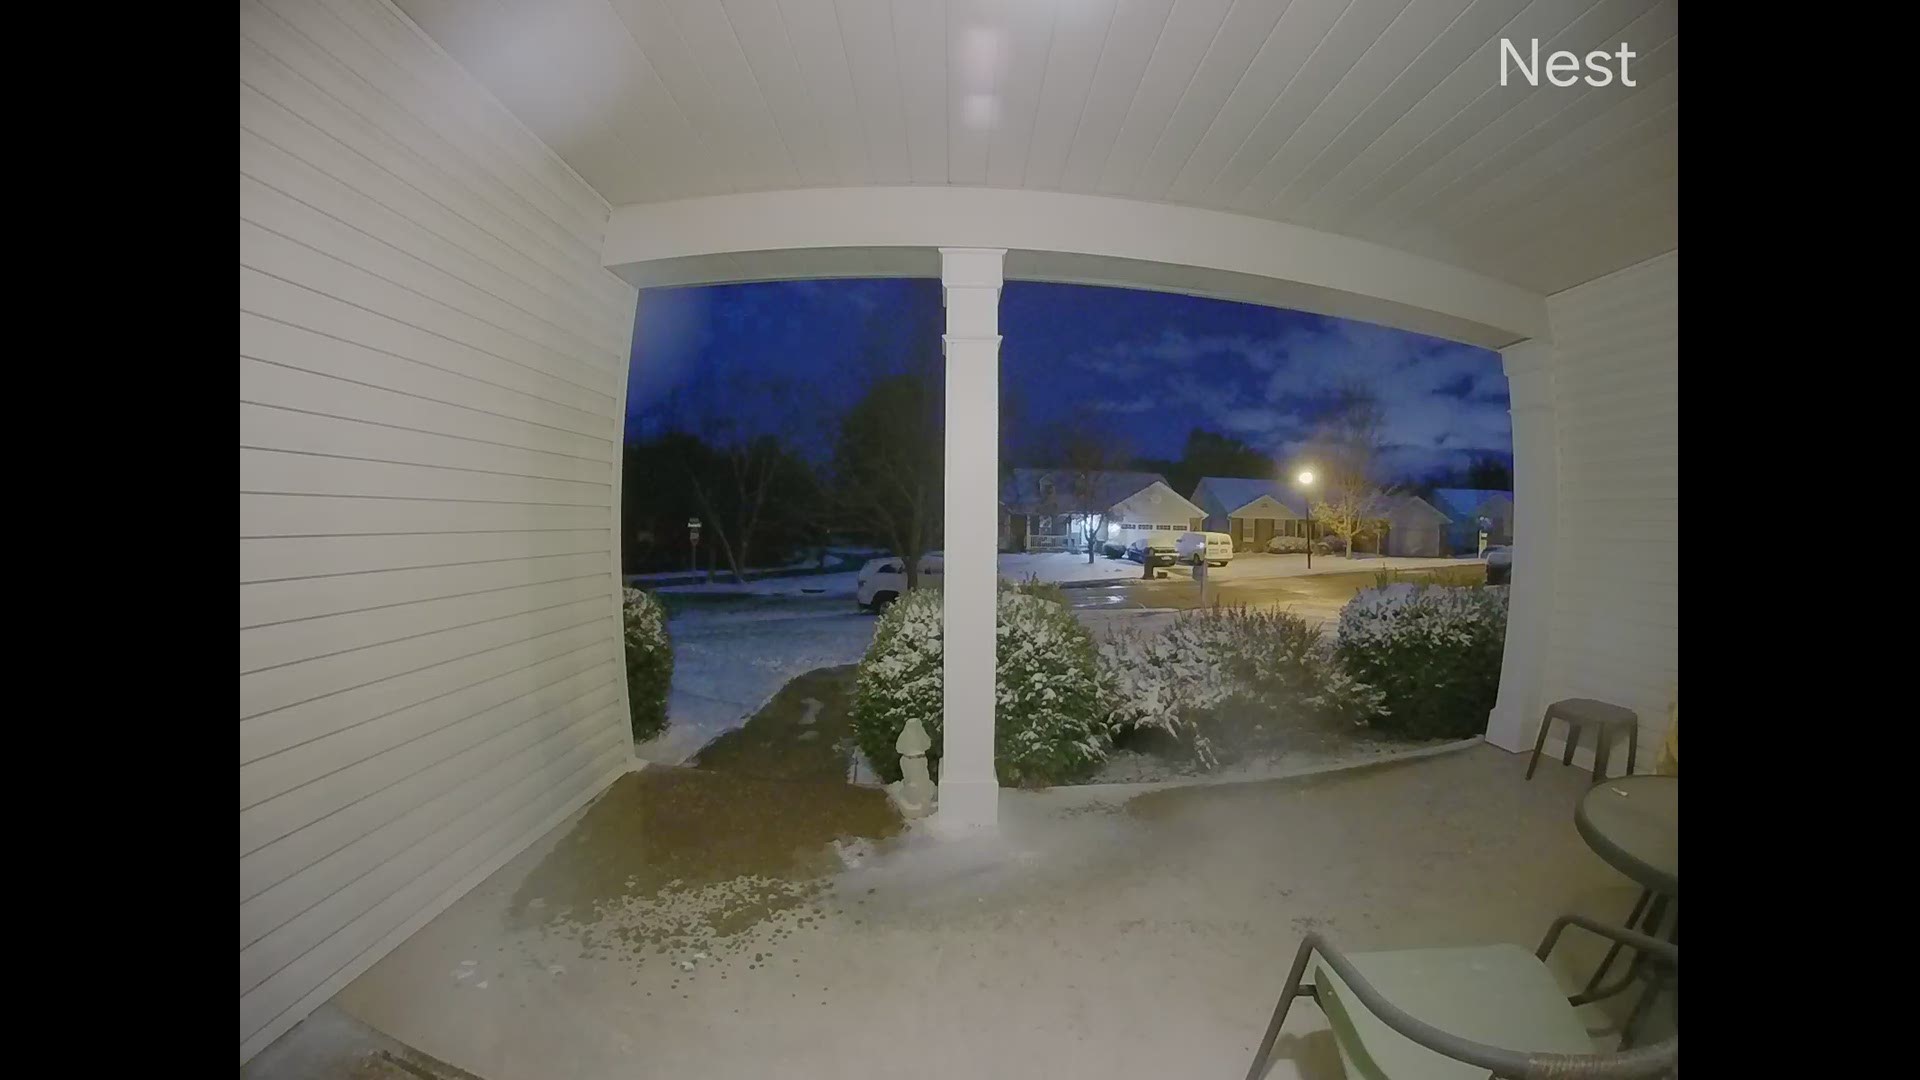 Viewer Tim Mauldin's video doorbell captured video of an apparent meteor streaking through the sky in St. Charles County.